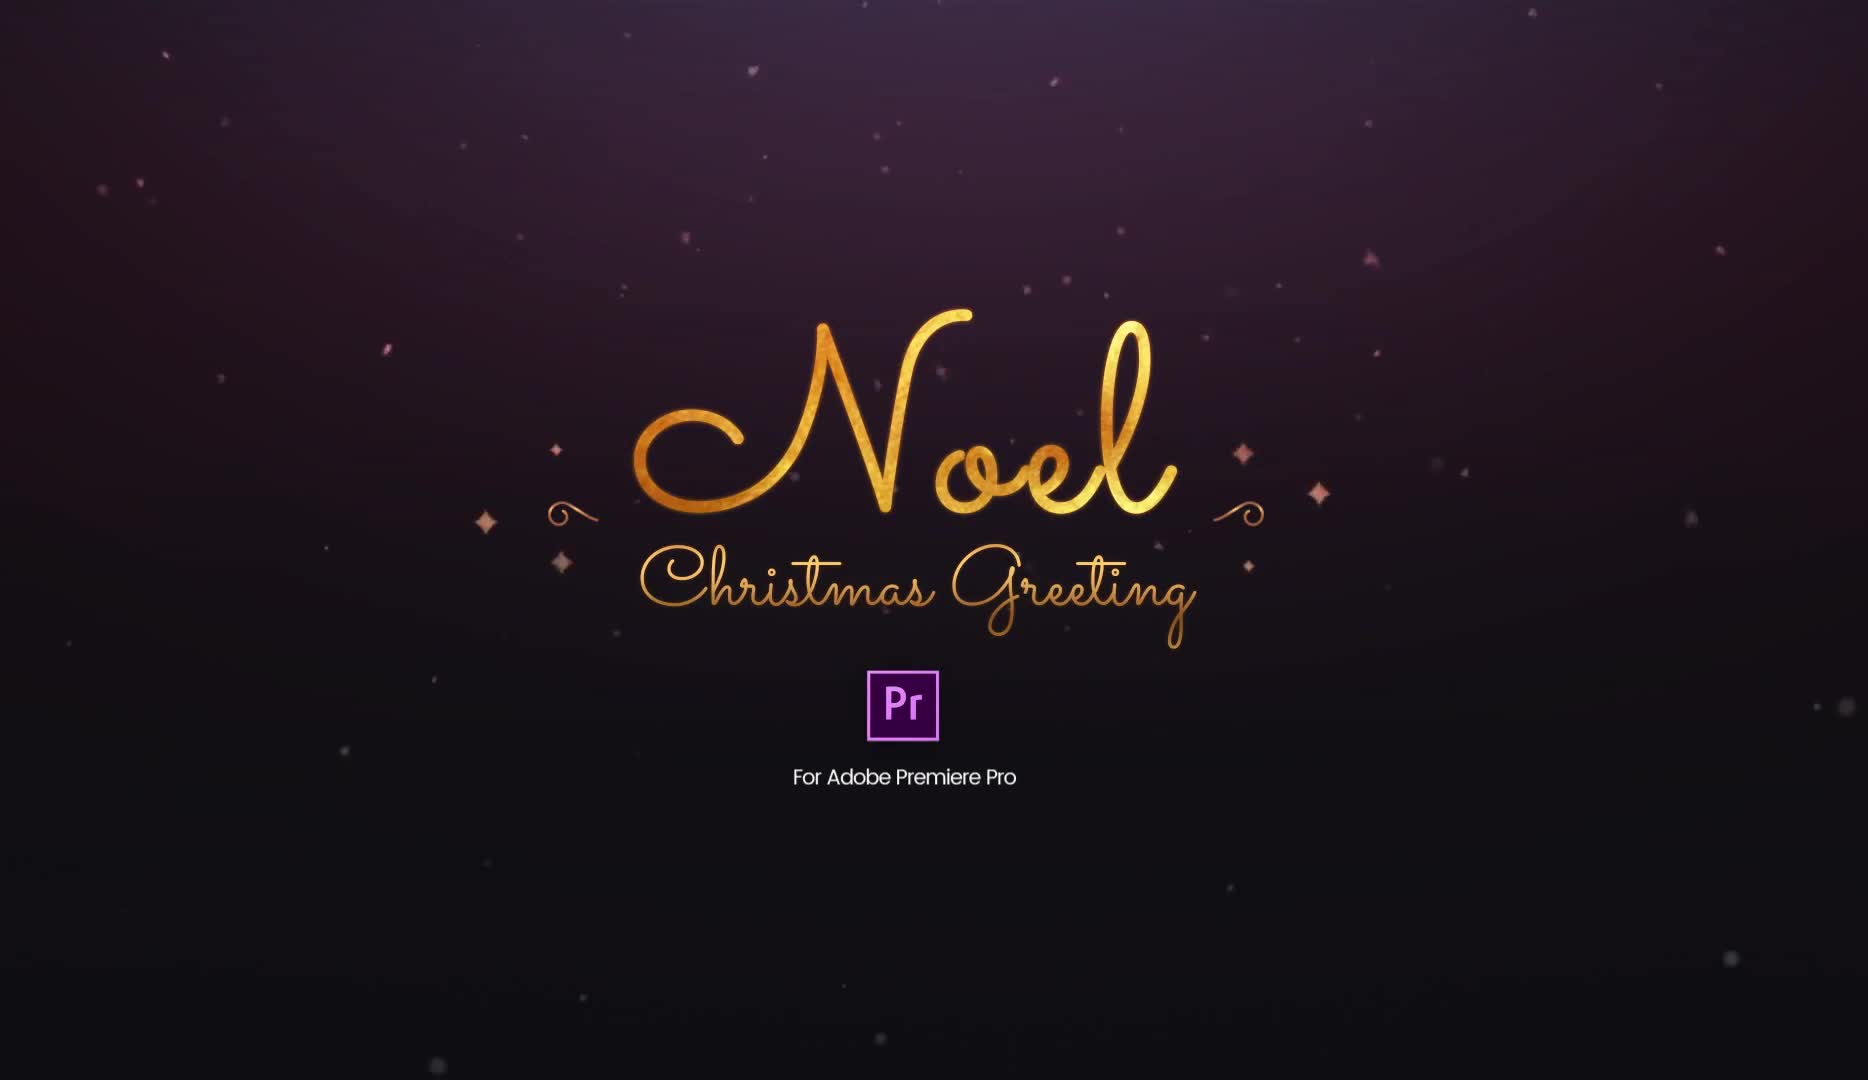 Noel Christmas Greetins for Premiere Pro Videohive 23012292 Premiere Pro Image 1